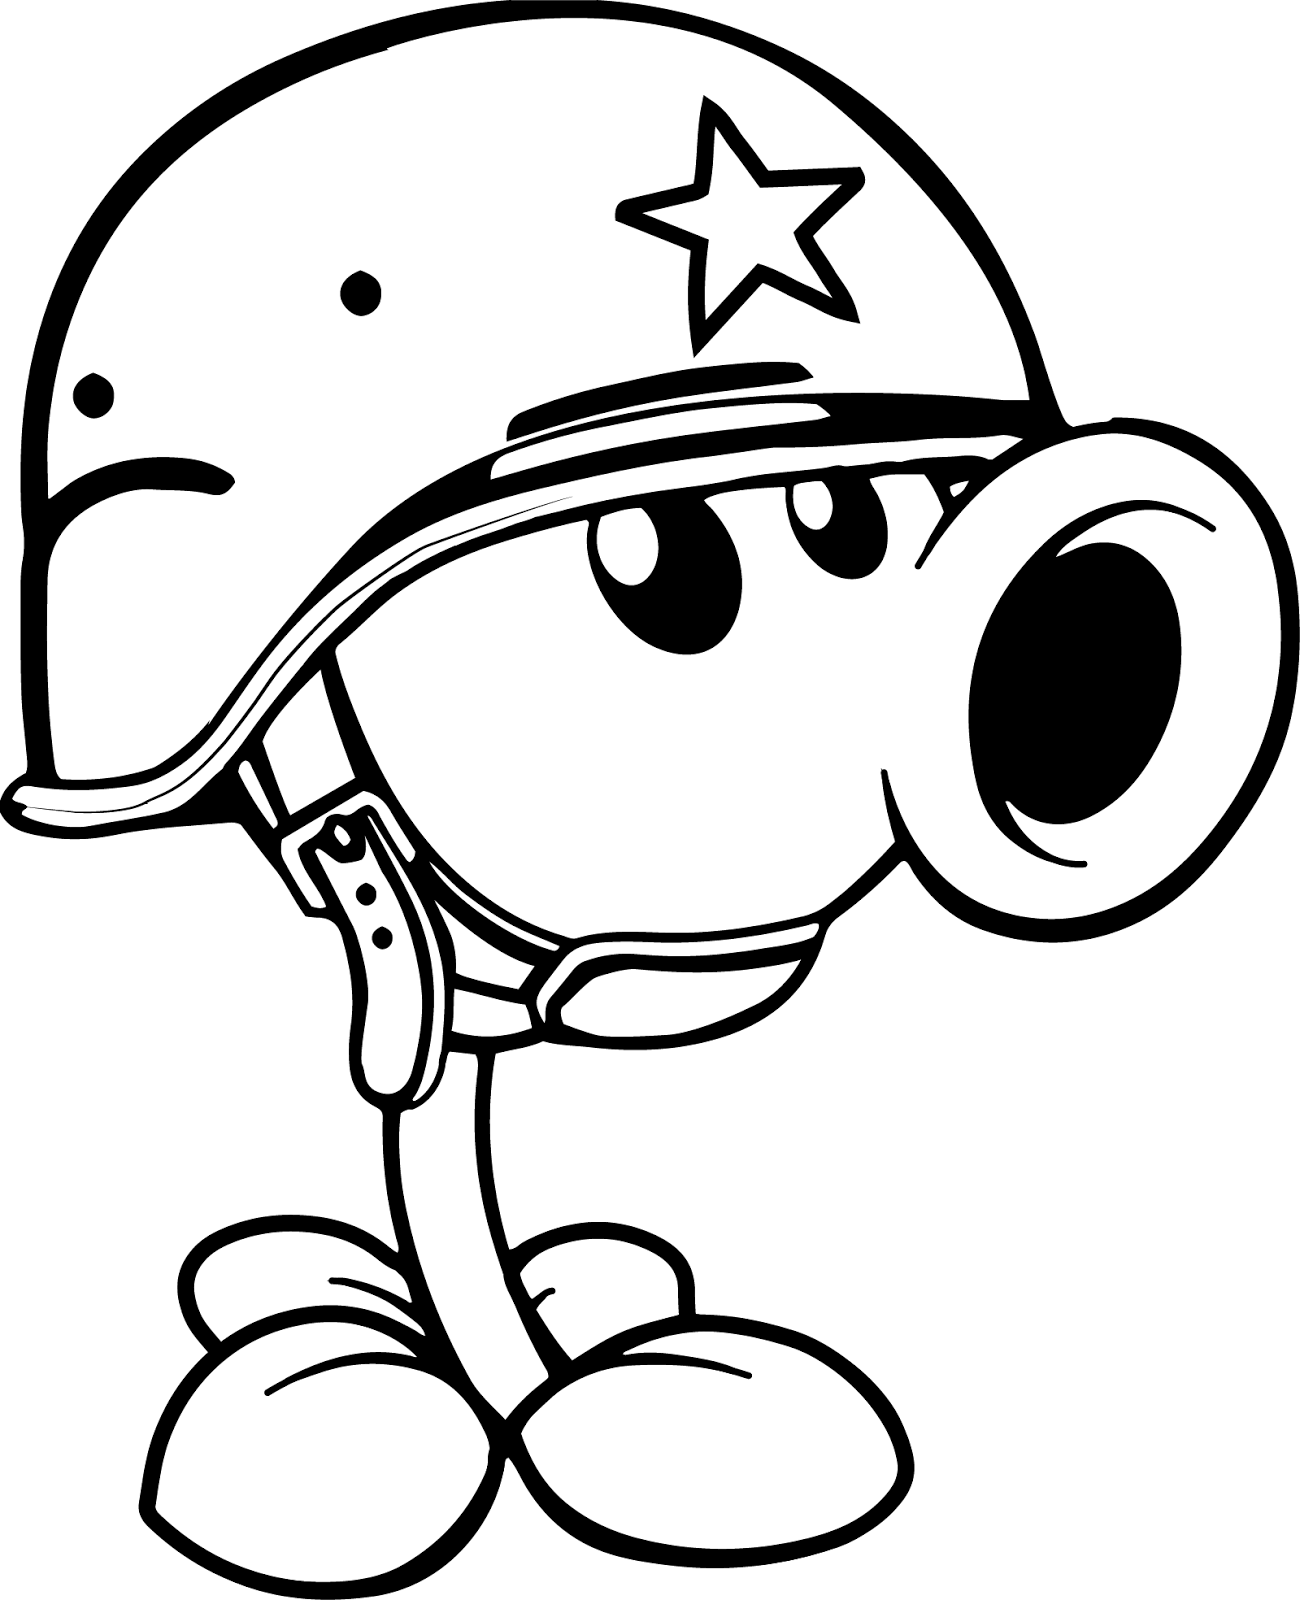 Peashooter Coloring Pages.